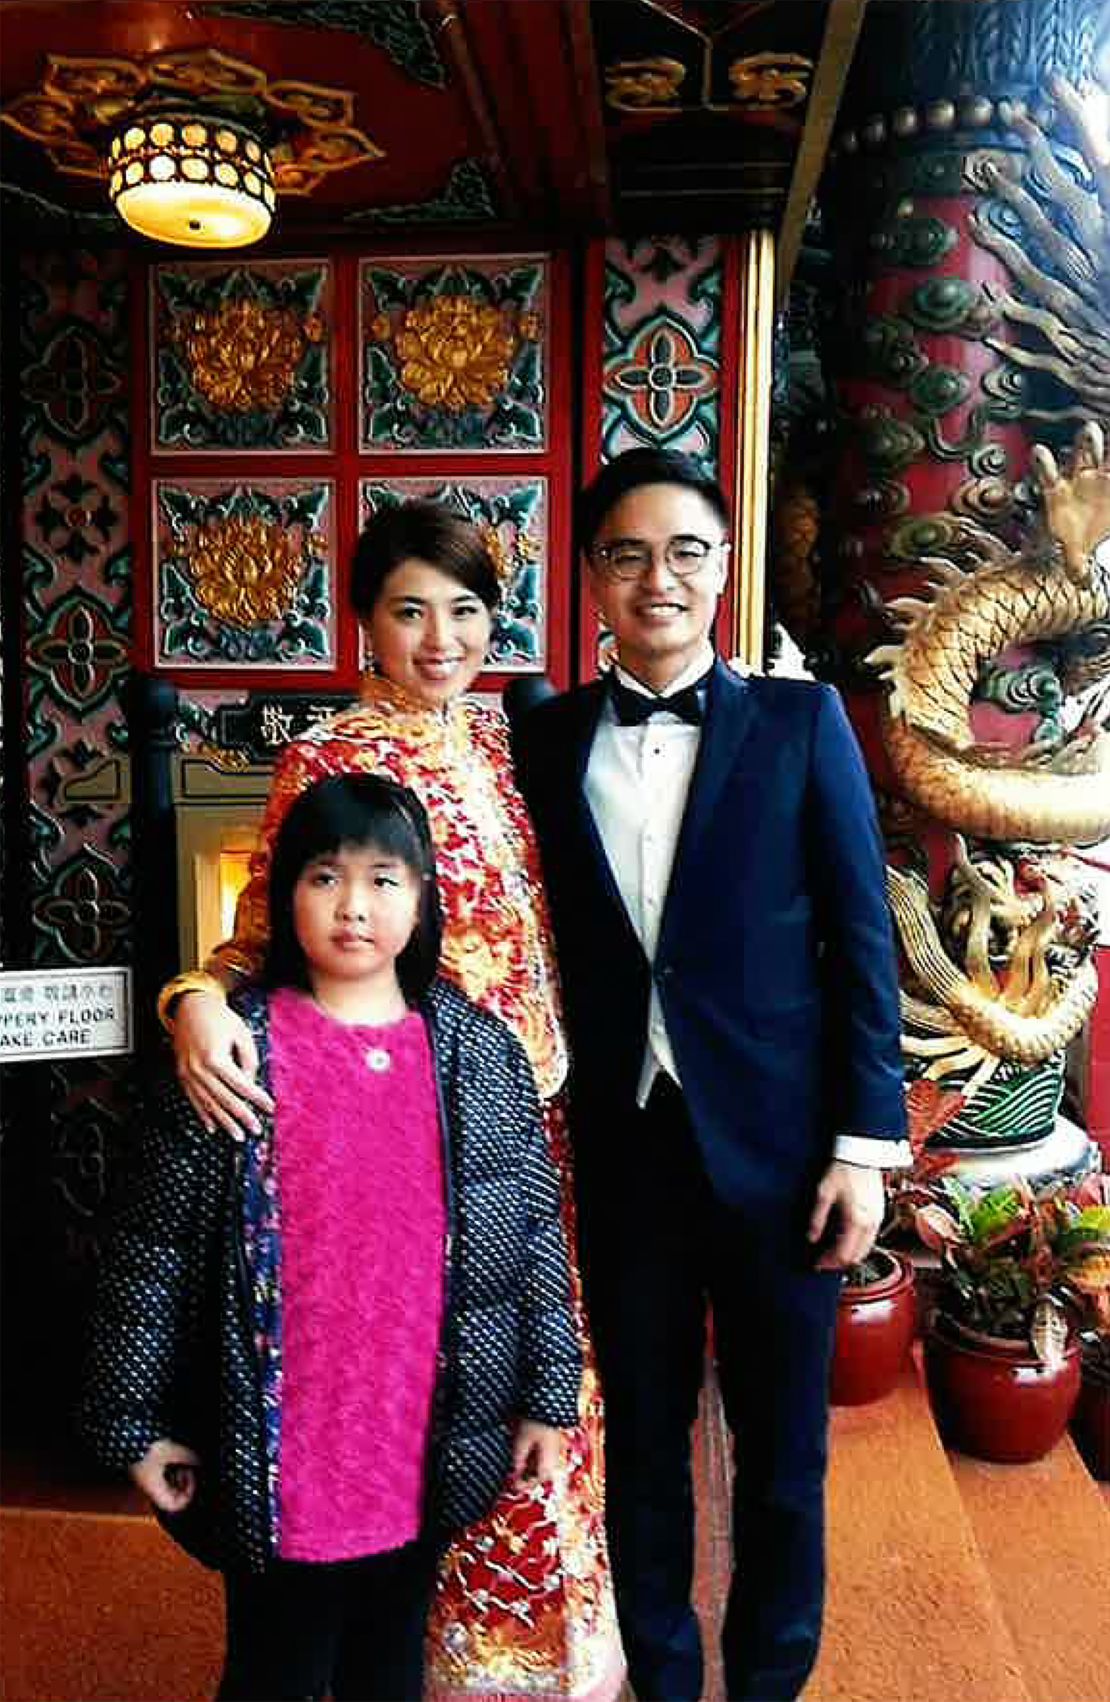 Members of the Chan family attend a wedding banquet at Jumbo in the 2010s.